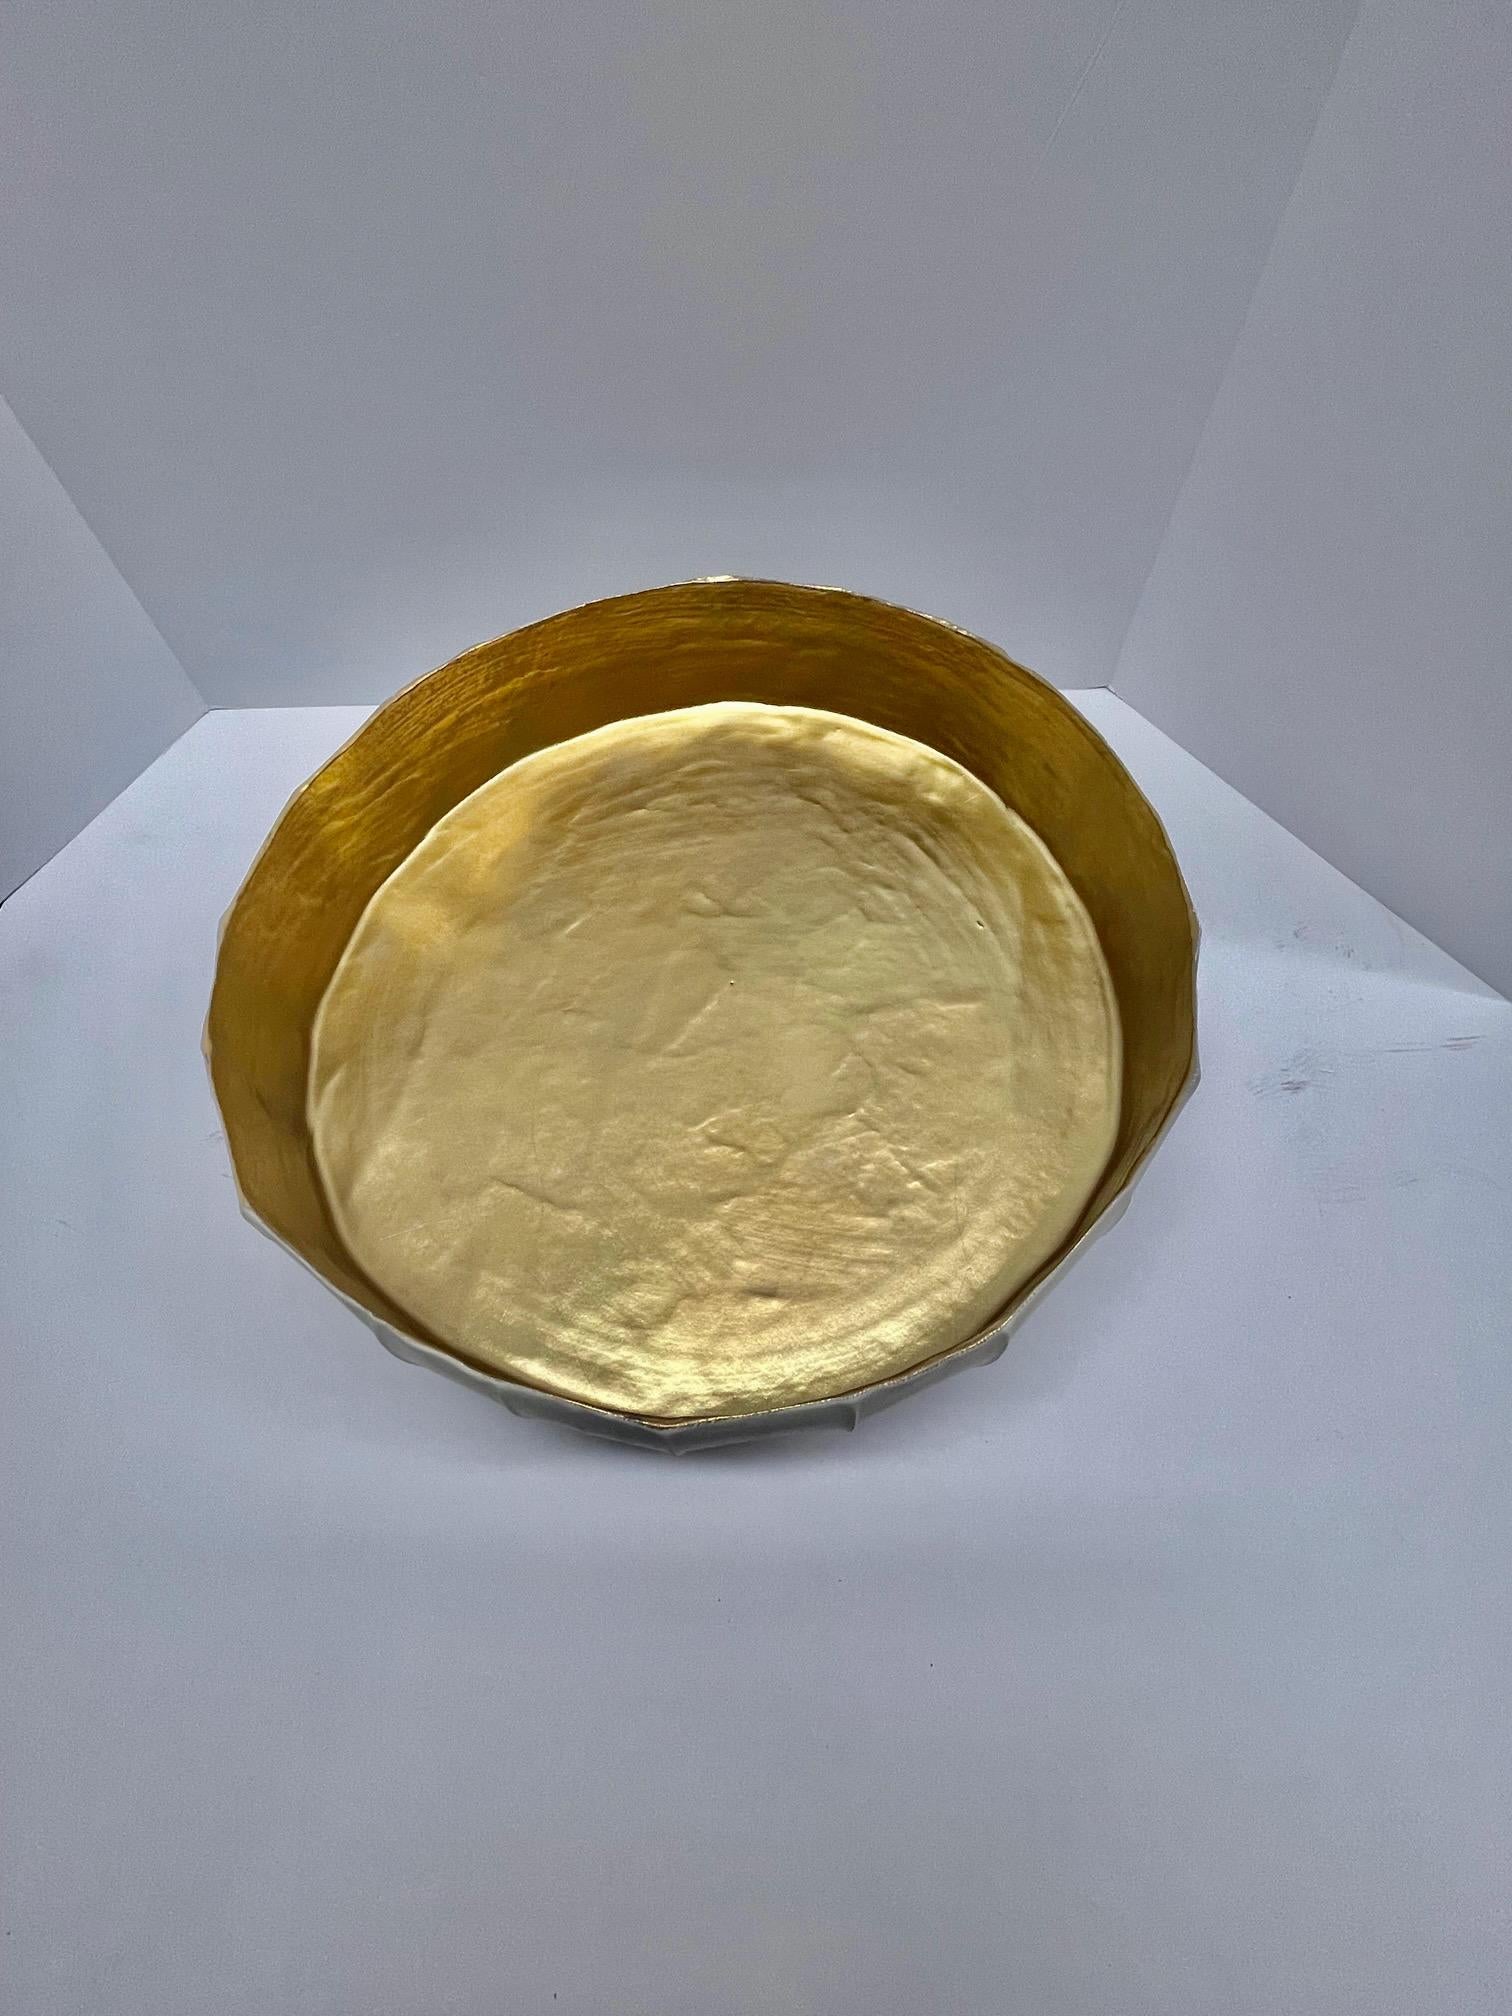 White Porcelain With 22 Karat Gold Interior Footed Bowl, Italy, Contemporary  2